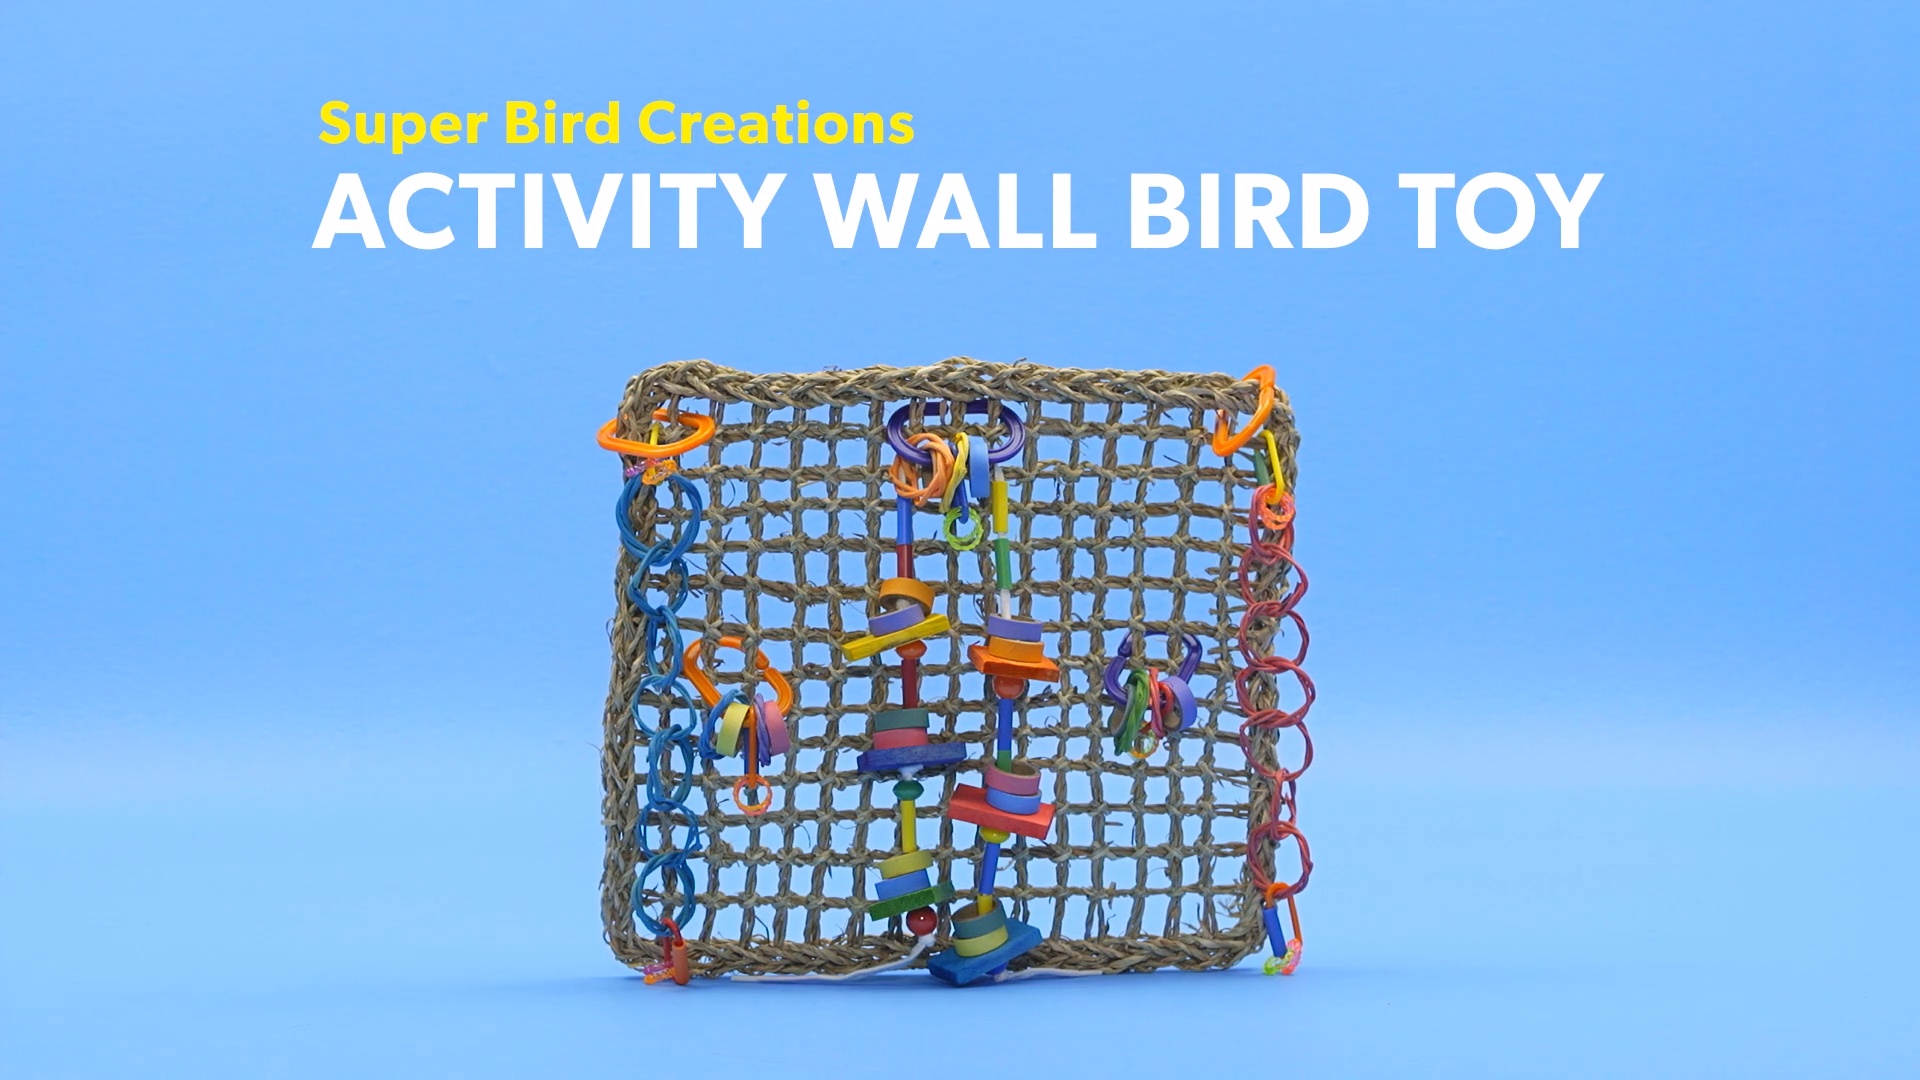 Super Bird Creations Mini Activity Wall Toy for Birds 